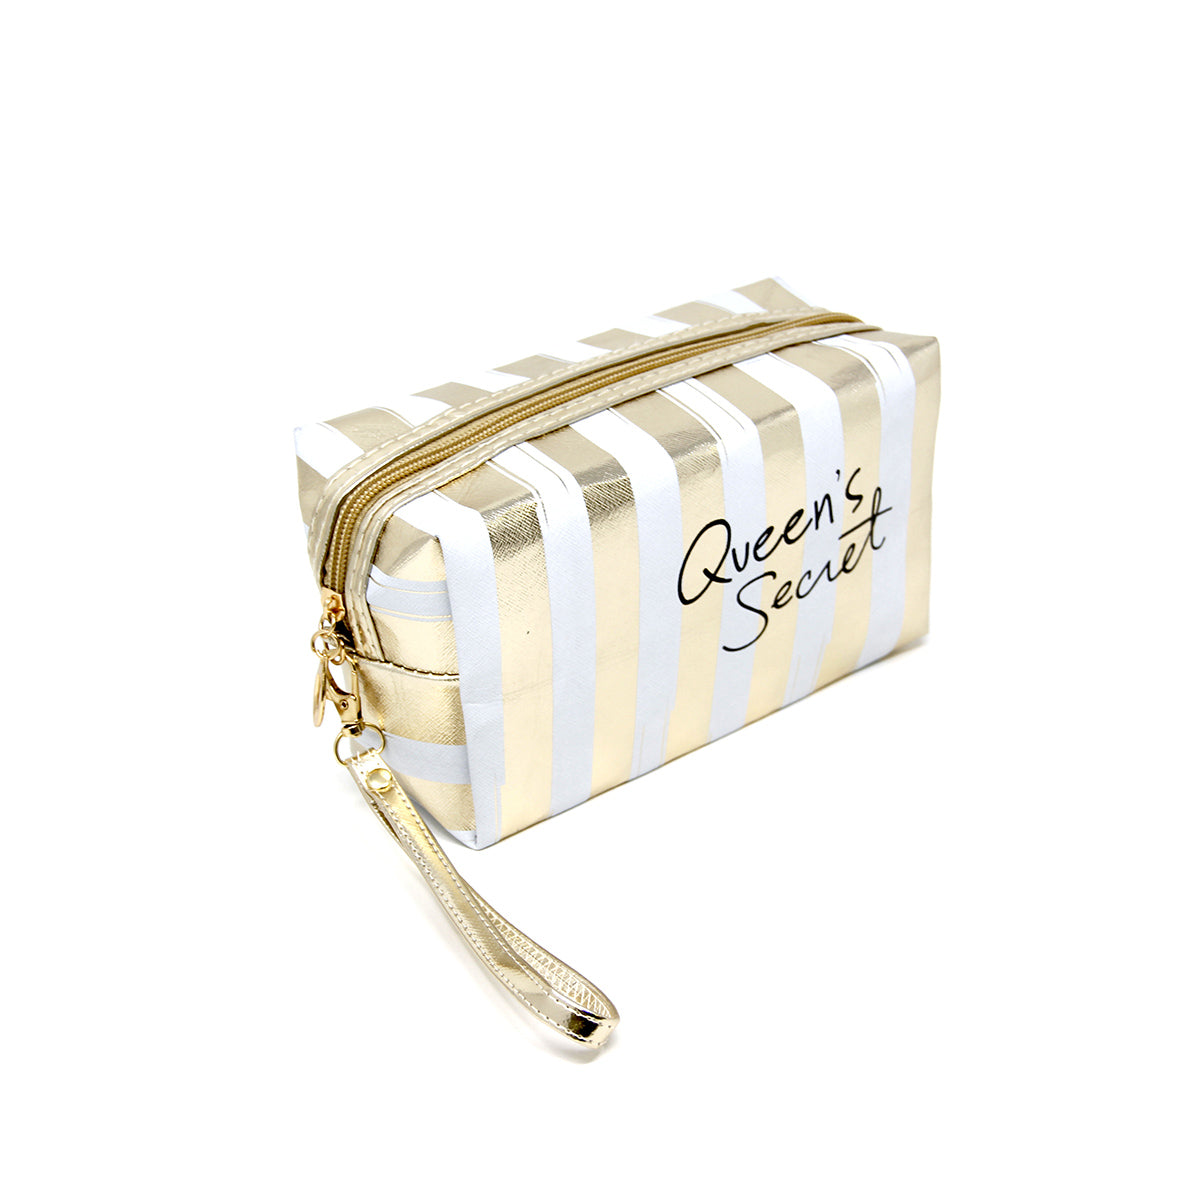 White and Gold Queen's Secret Makeup Pouch